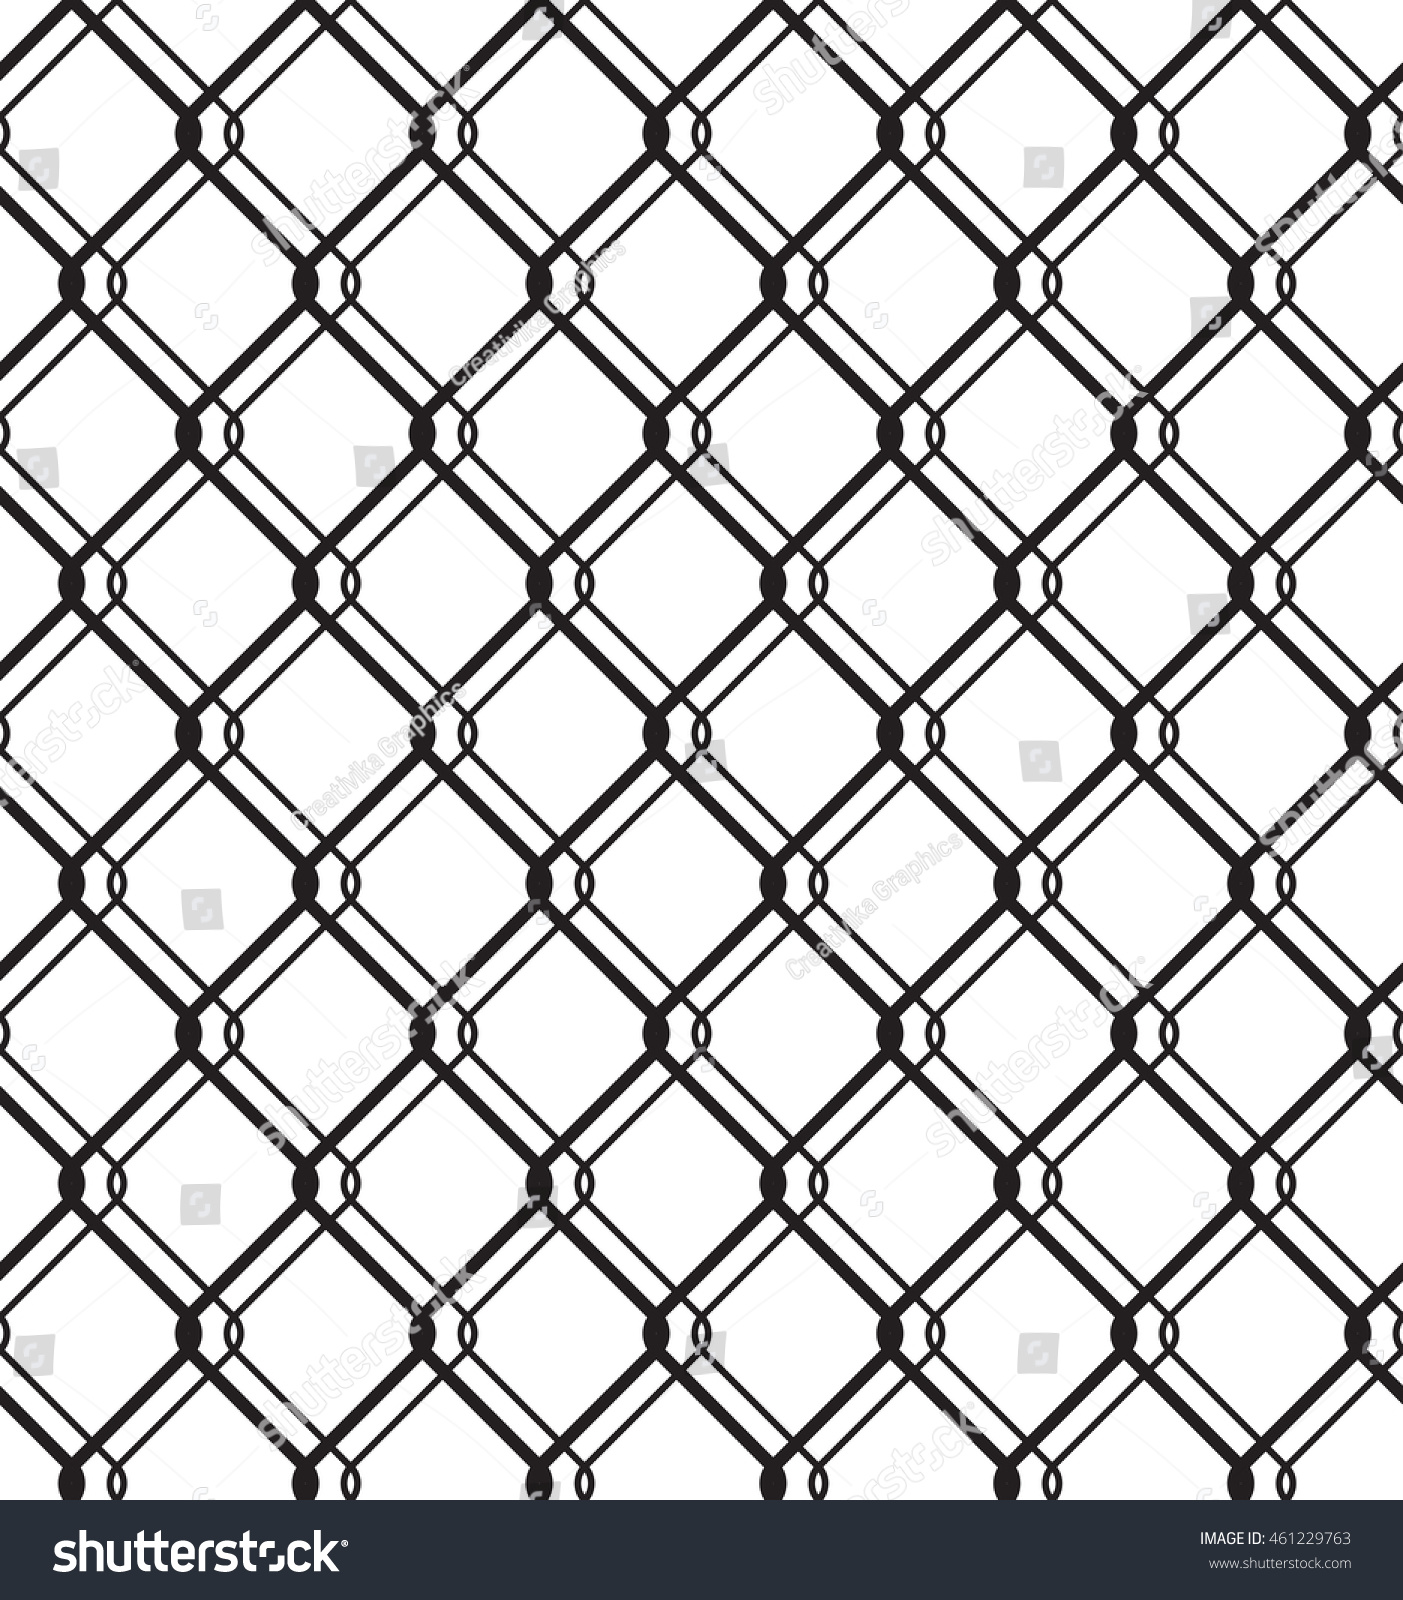 Wired Metallic Fence Seamless Texture Steel Stock Vector 461229763 ...